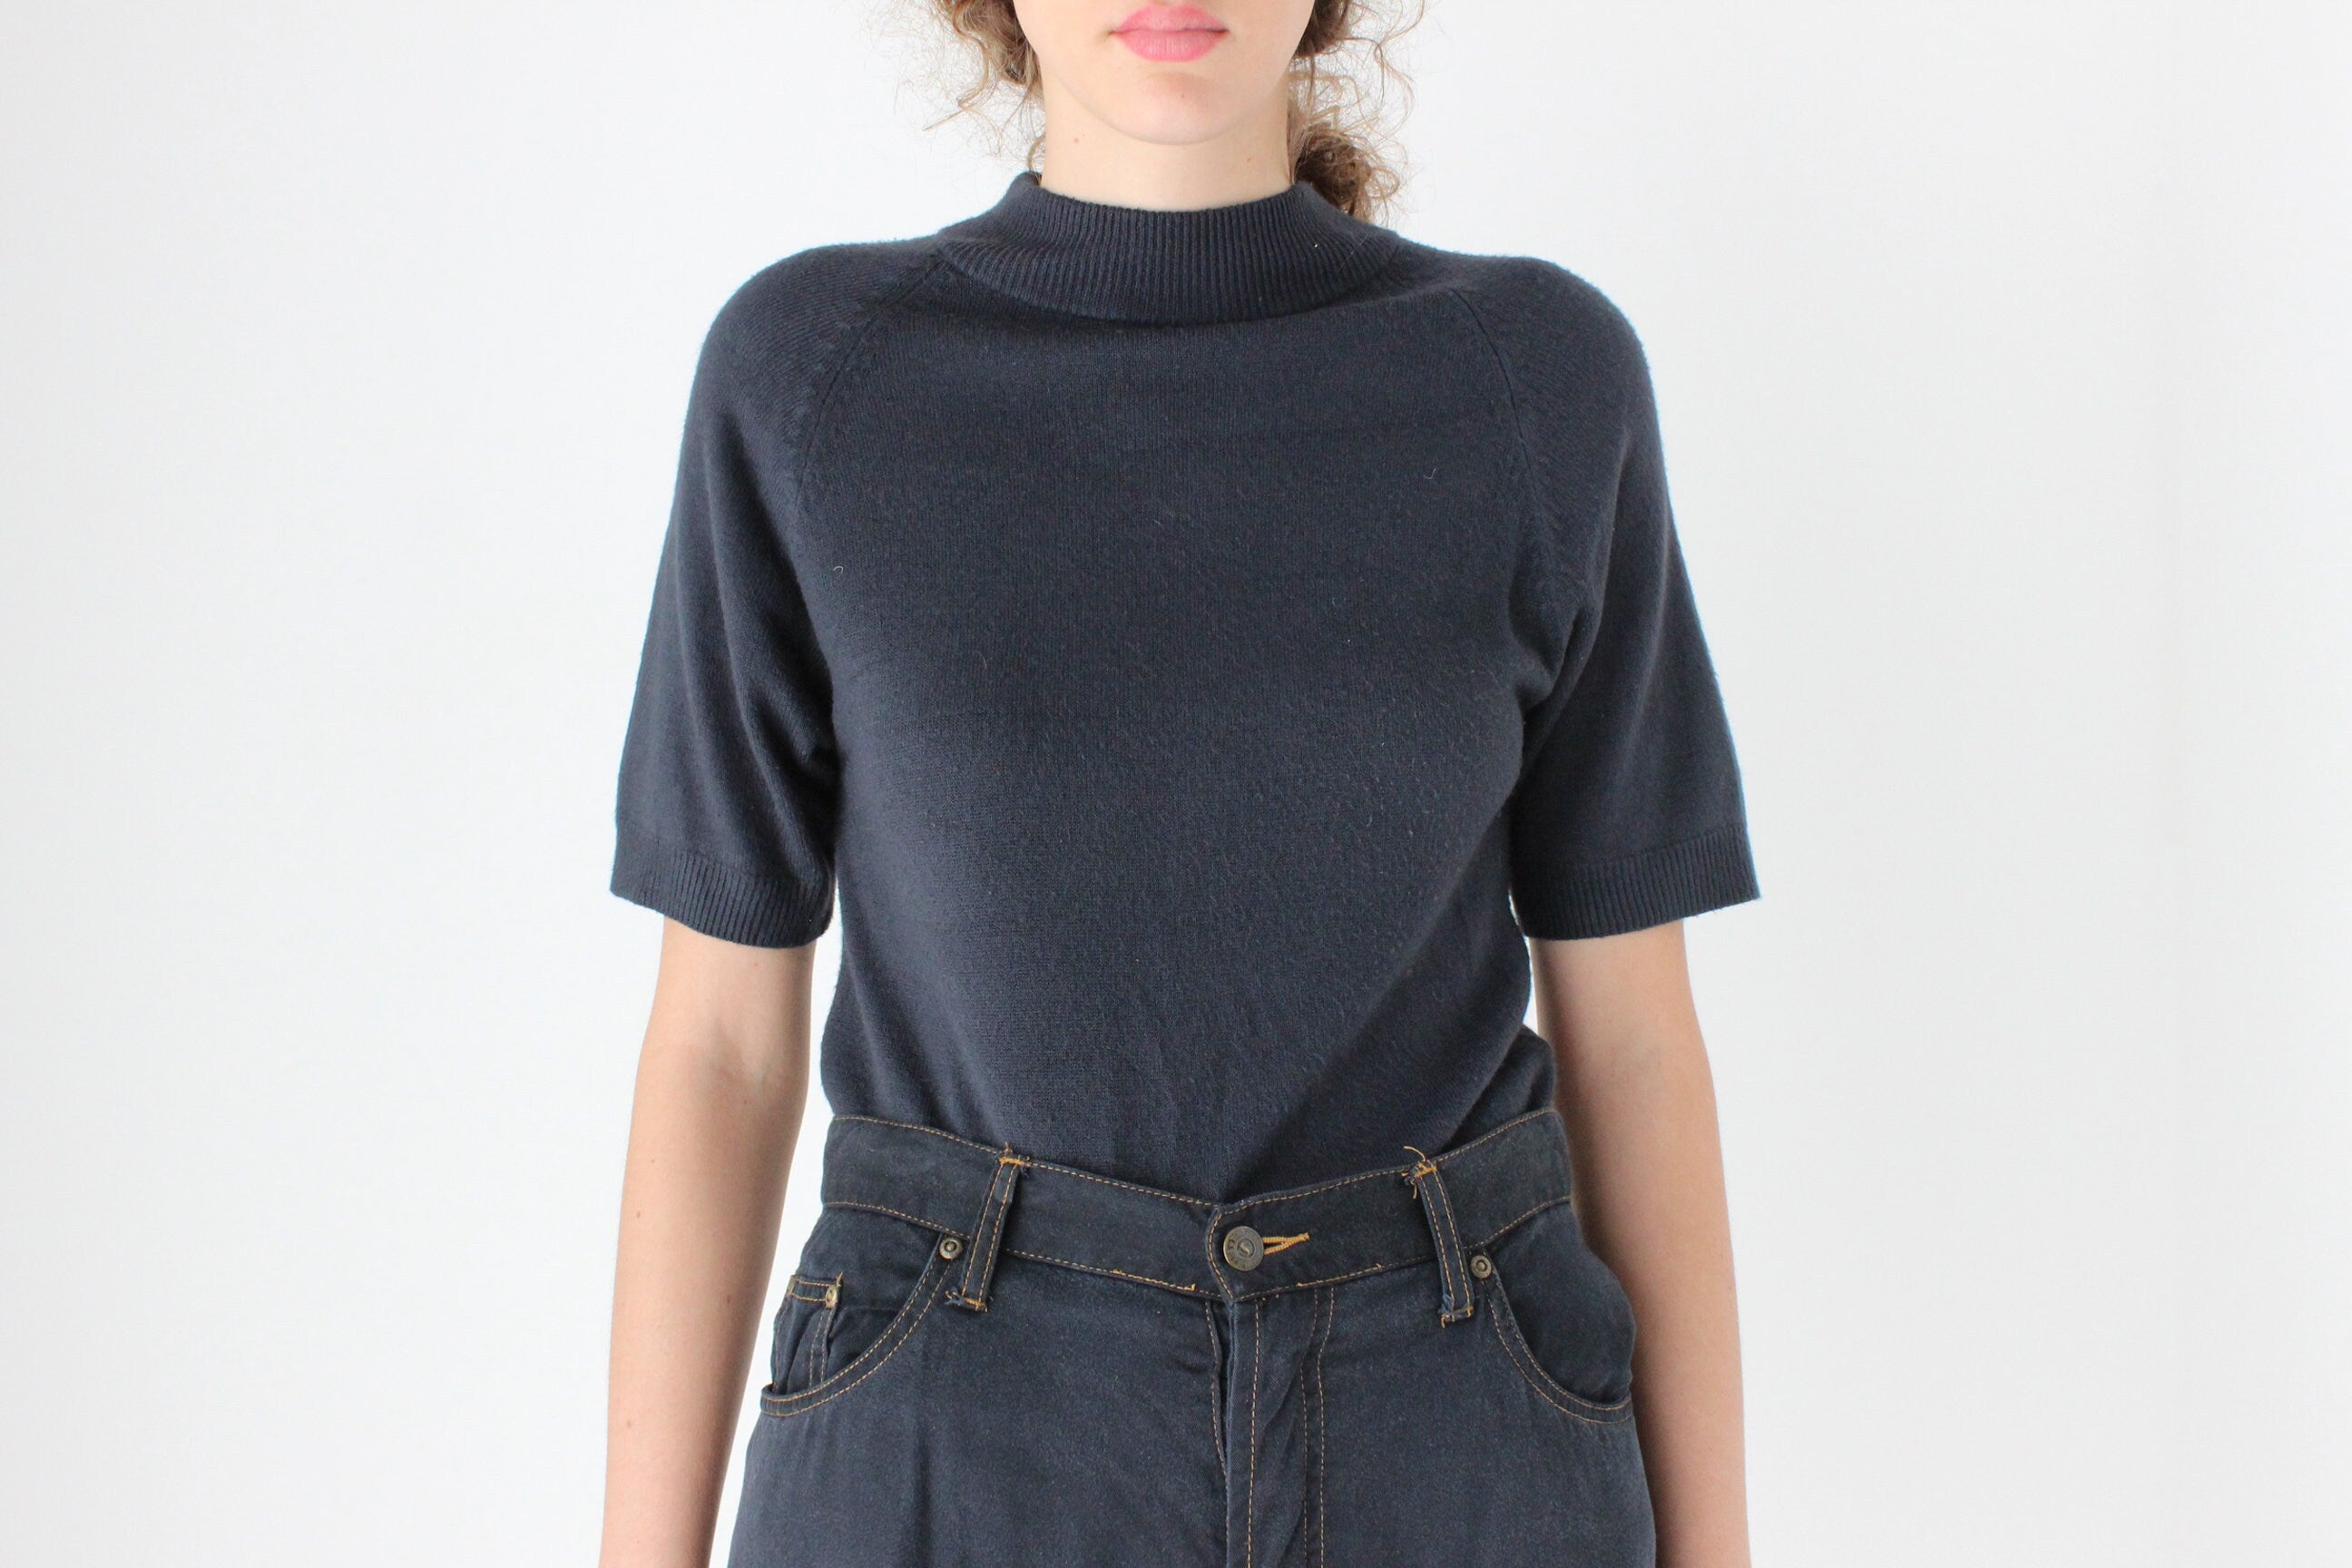 90s Soft Knit Short Sleeve Sweater Top